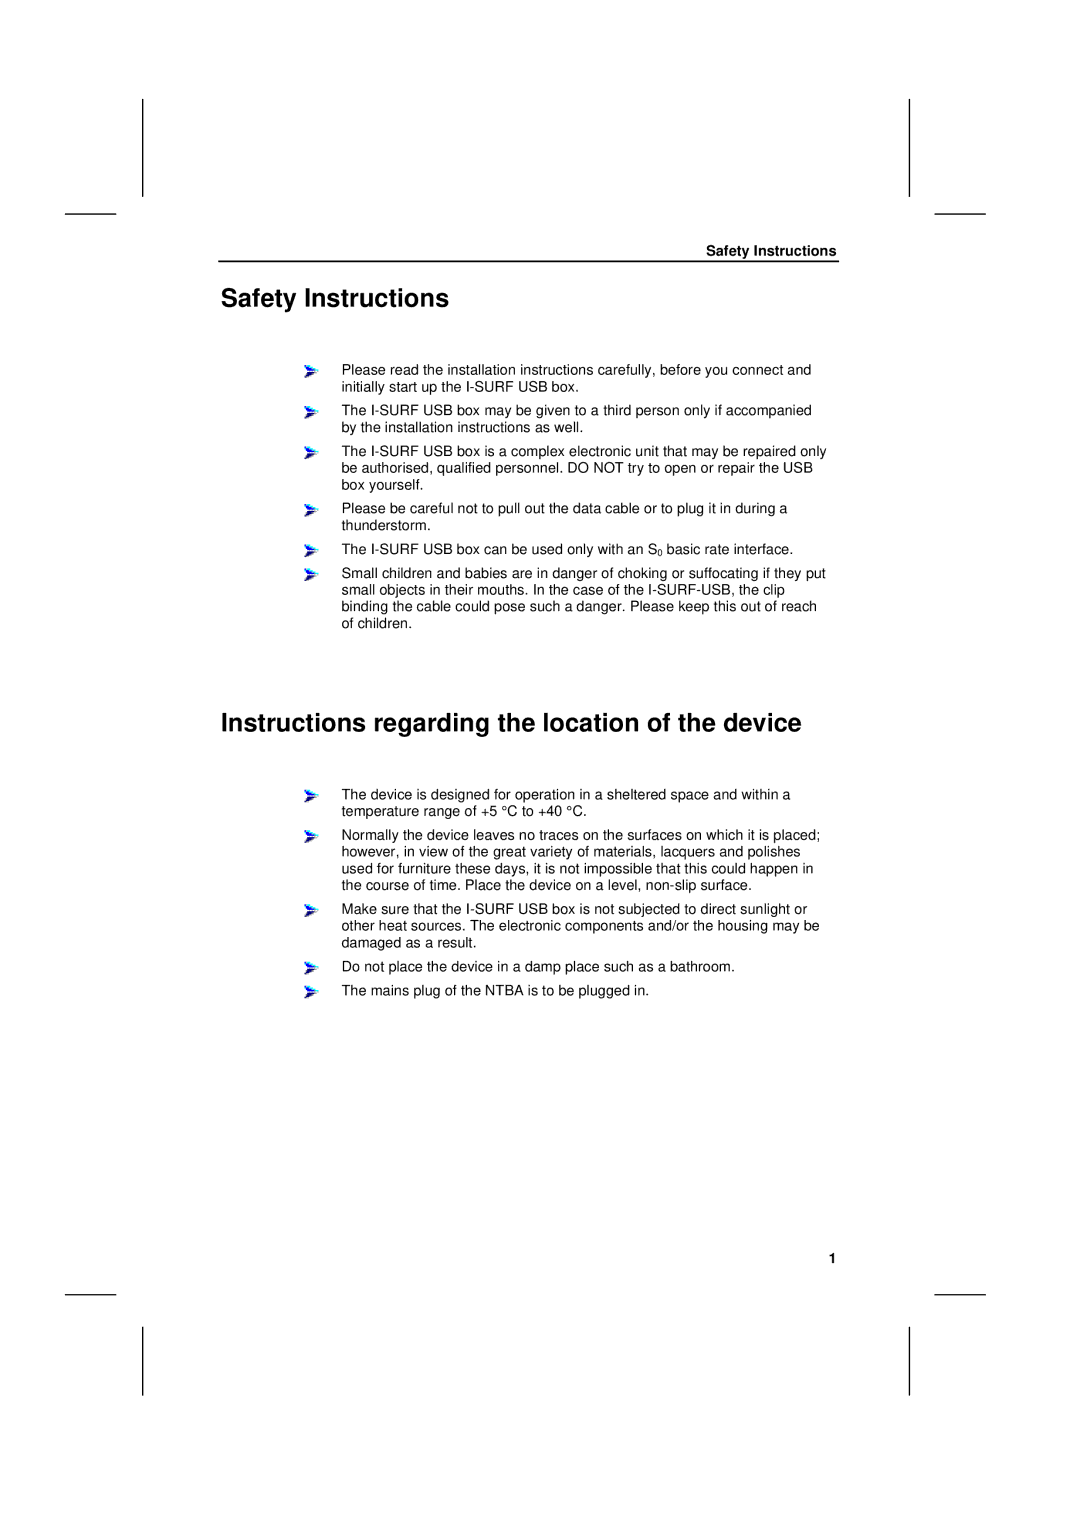 Siemens I-SURF manual Safety Instructions, Instructions regarding the location of the device 